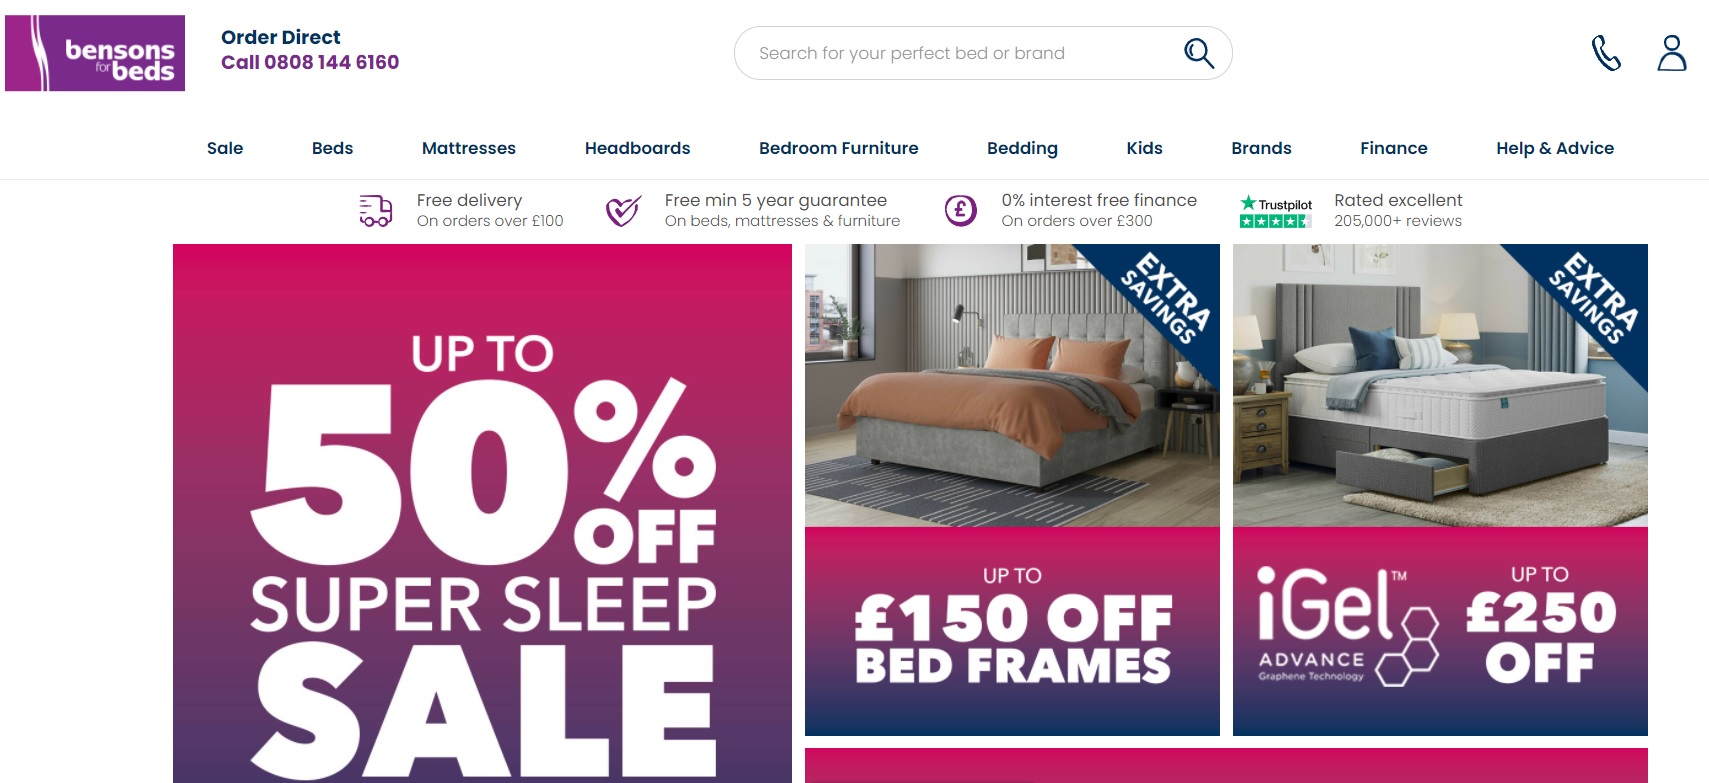 Bensons has achieved "double digit" online growth